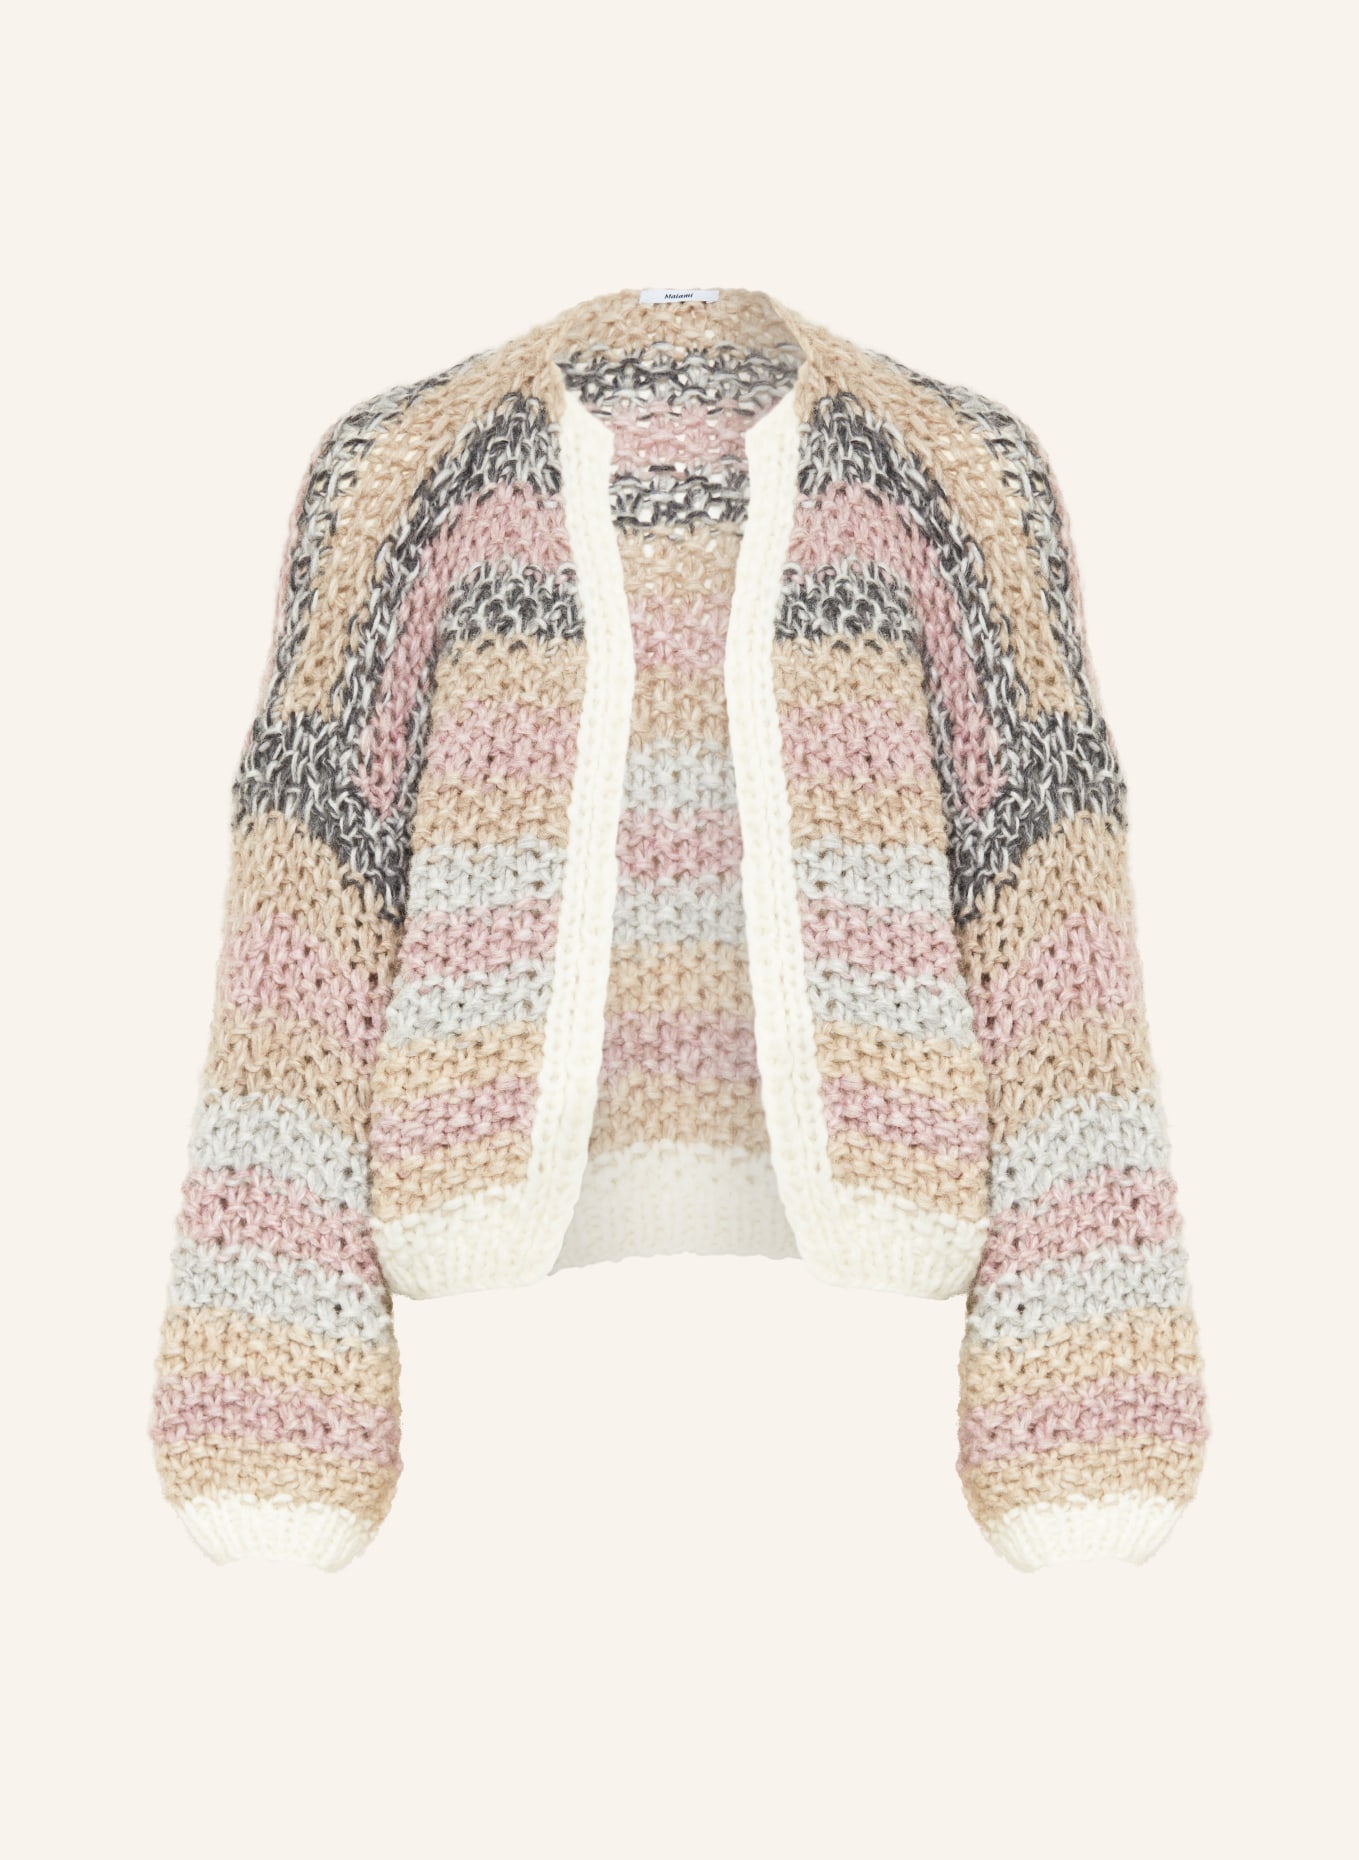 MAIAMI Knit cardigan made of alpaca, Color: BEIGE/ ROSE/ GRAY (Image 1)